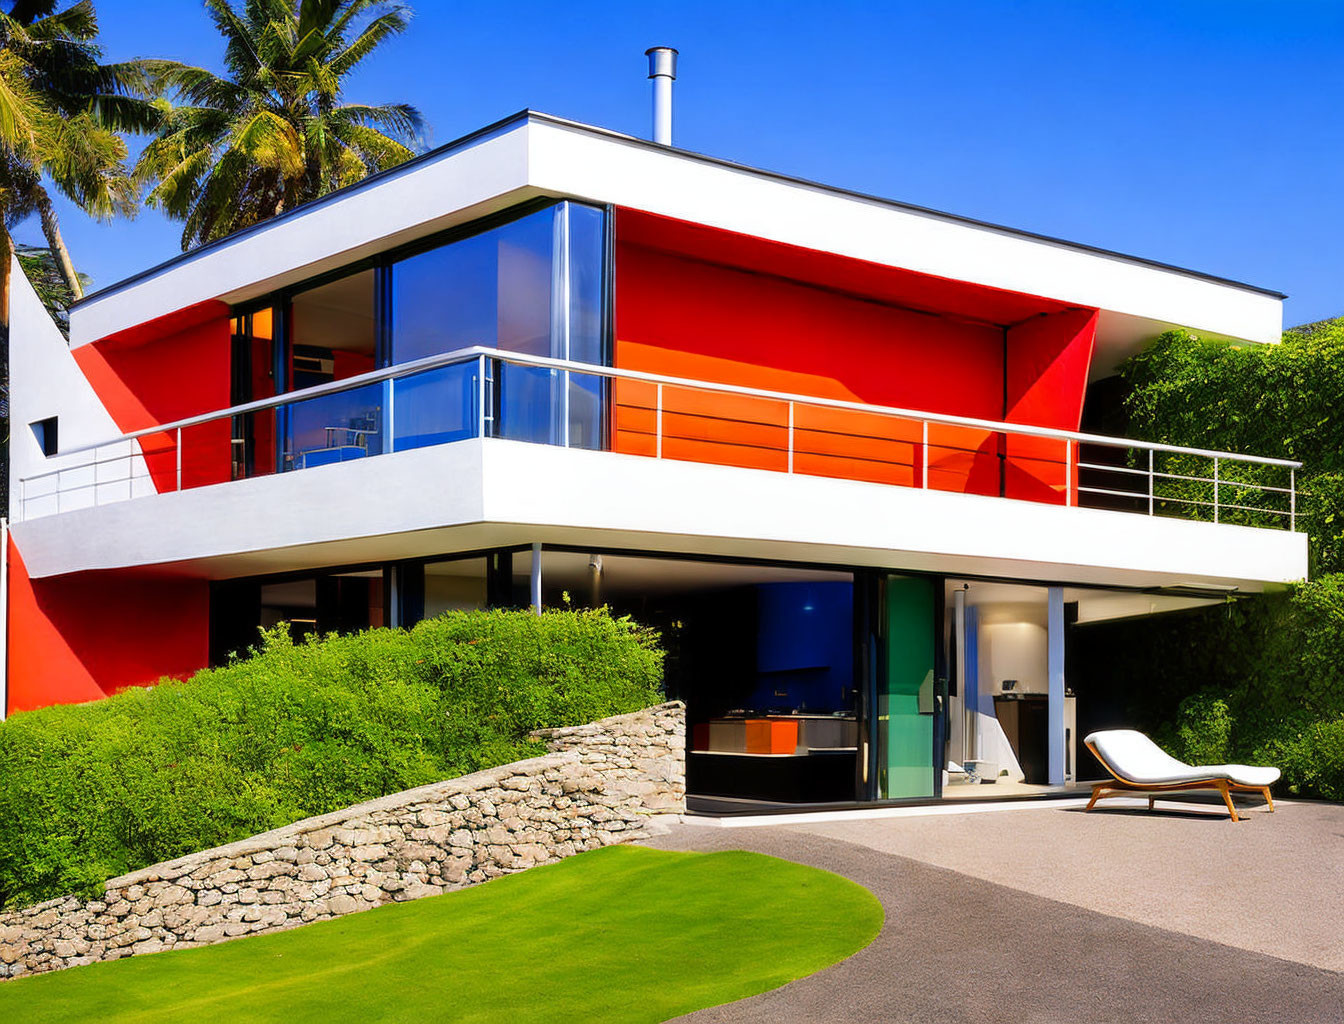 Modern house with red walls, white balconies, large windows, lush greenery, palm trees,